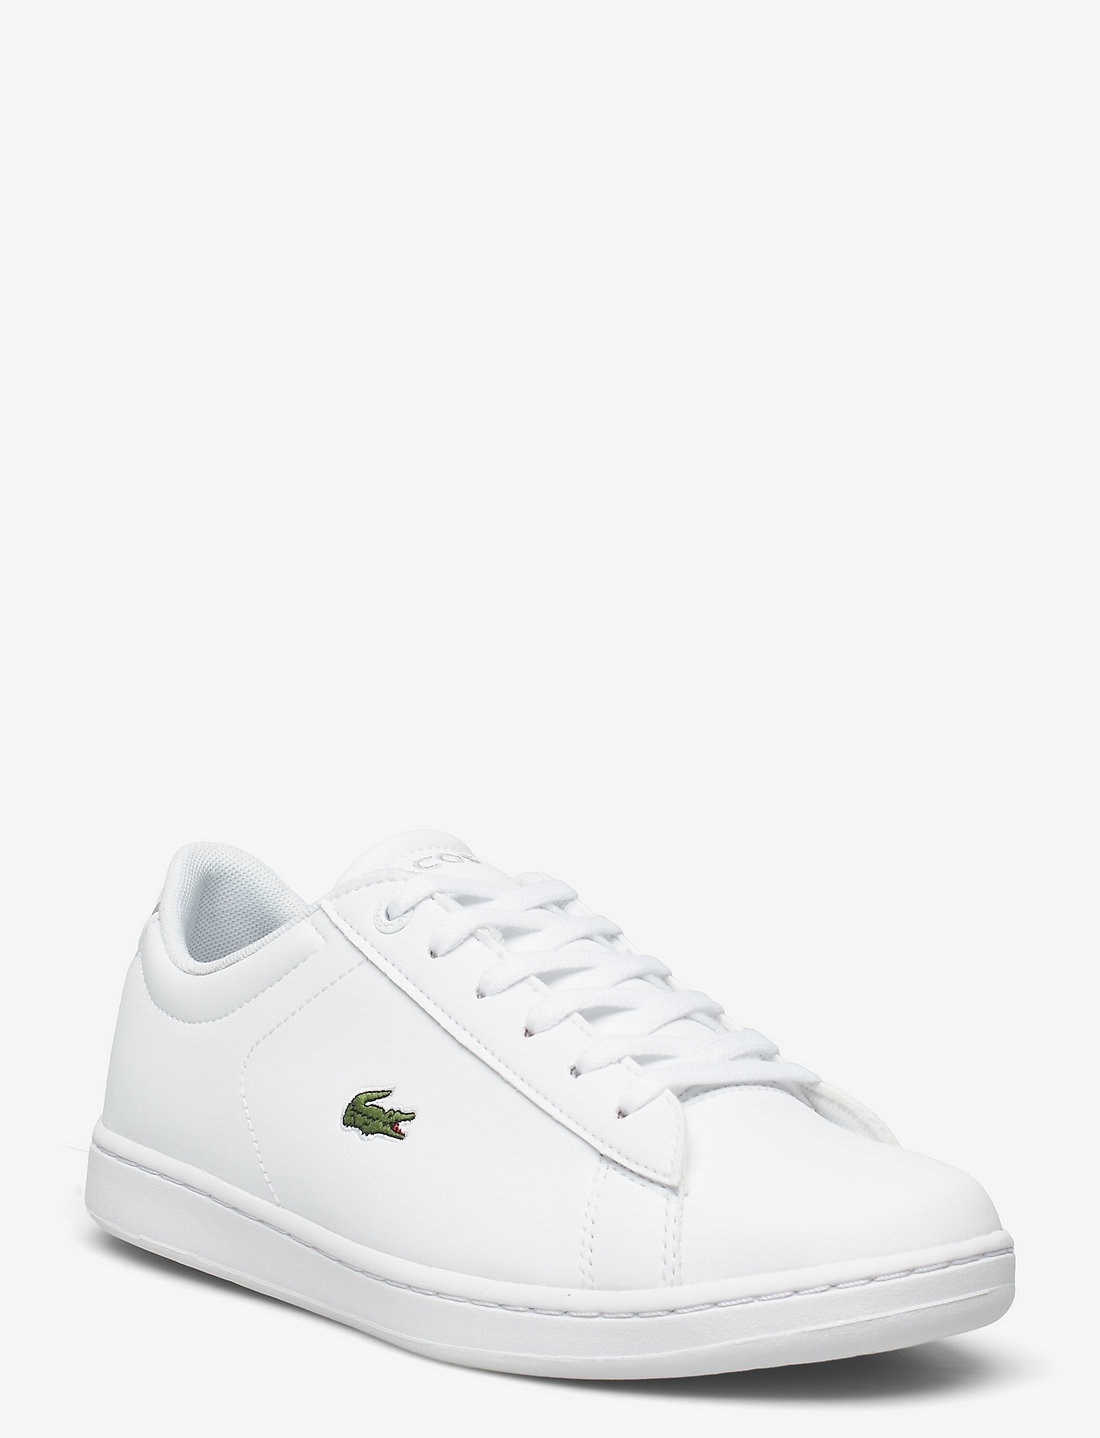 Terapi Foranderlig øst Lacoste Shoes Carnaby Evo Bl 21 1 - Lave sneakers - Boozt.com